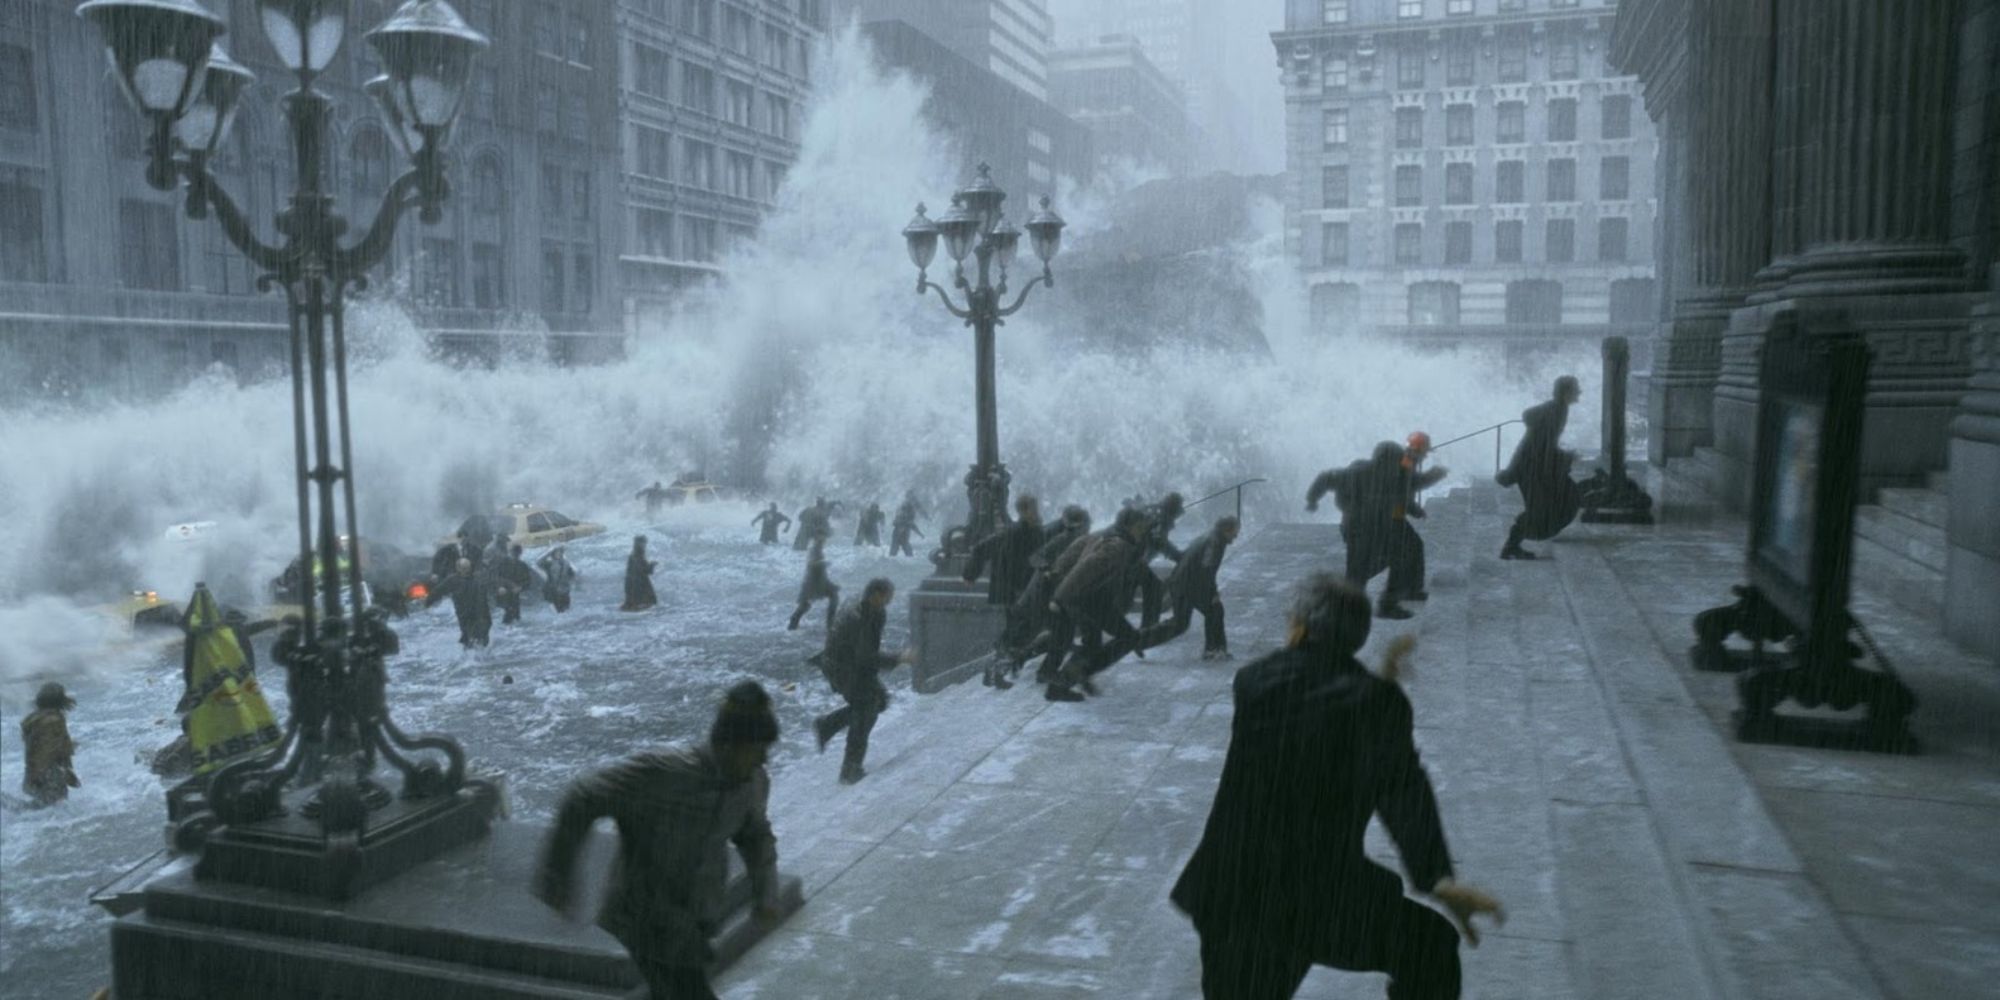 A scene from The Day After Tomorrow has people running in a panic